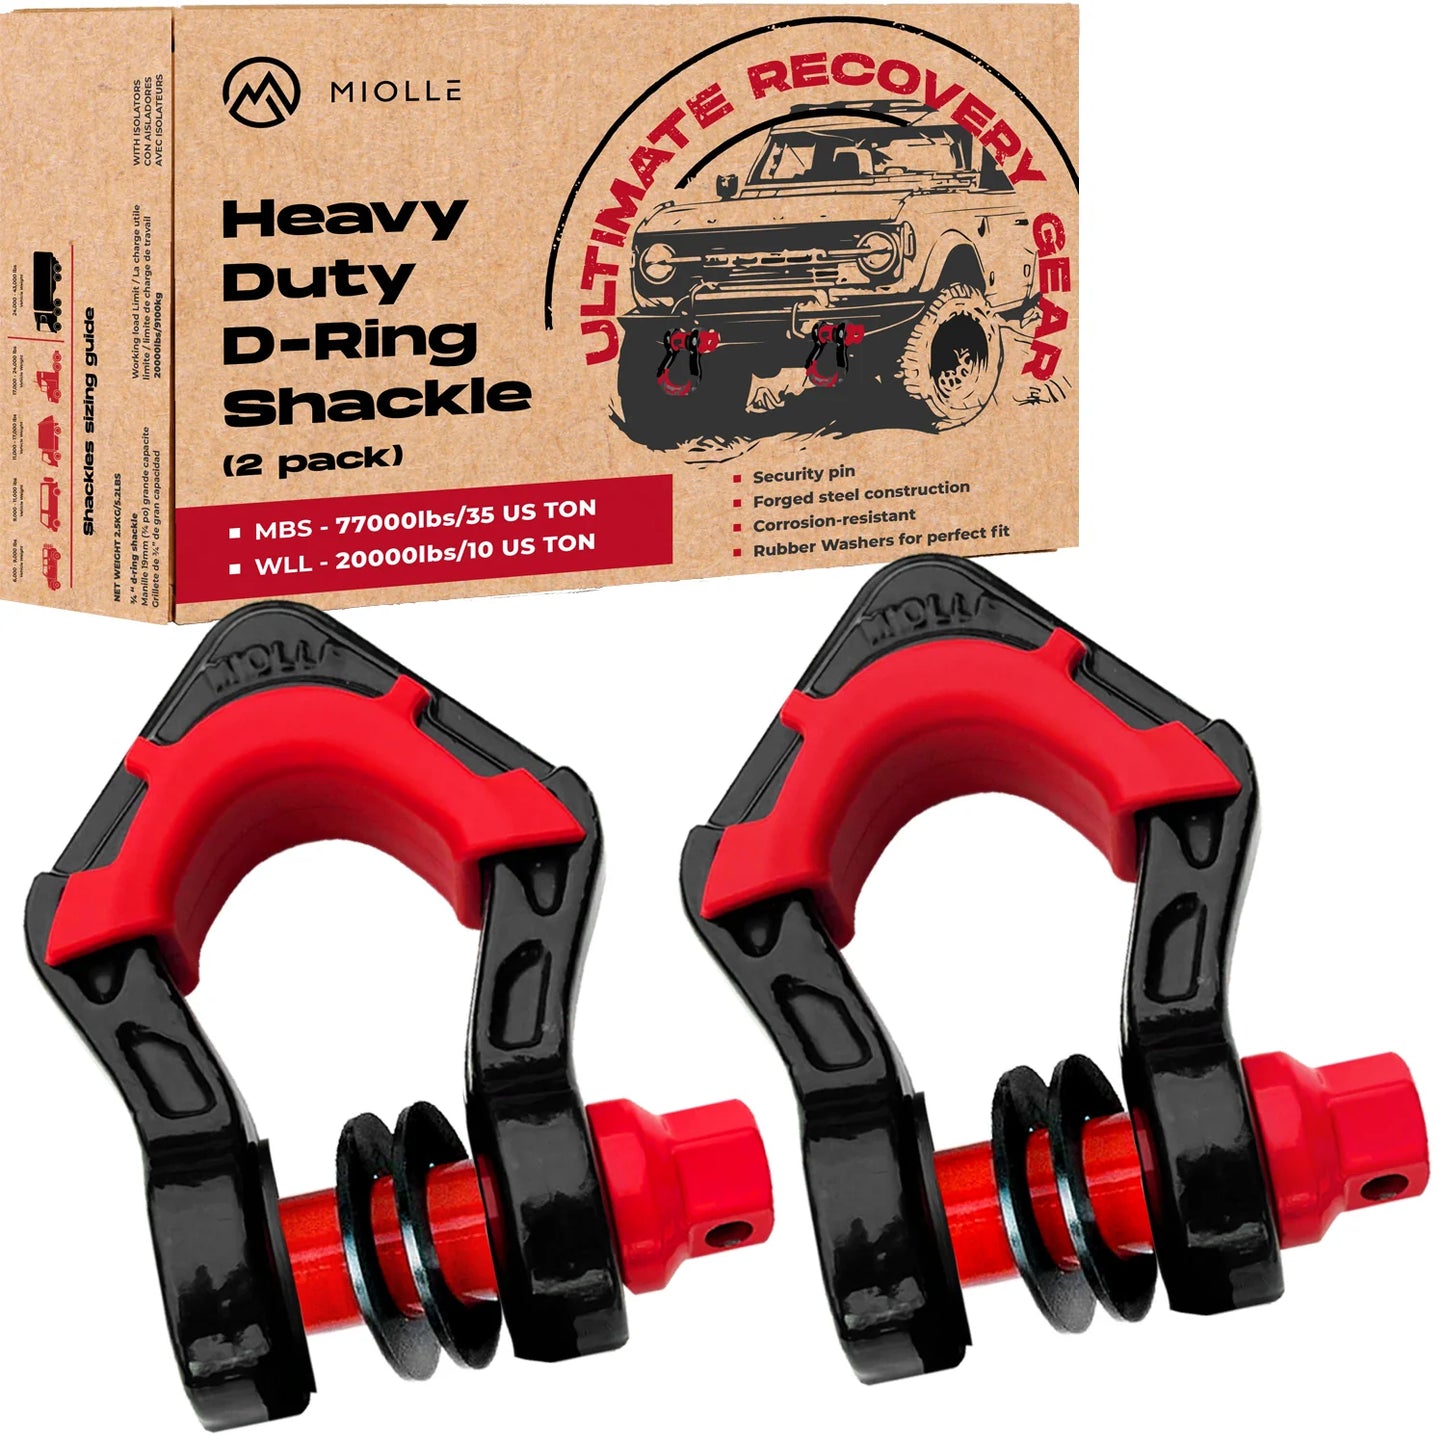 3/4 D-Ring Shackle Set with Anti-Theft Lock - by Miolle